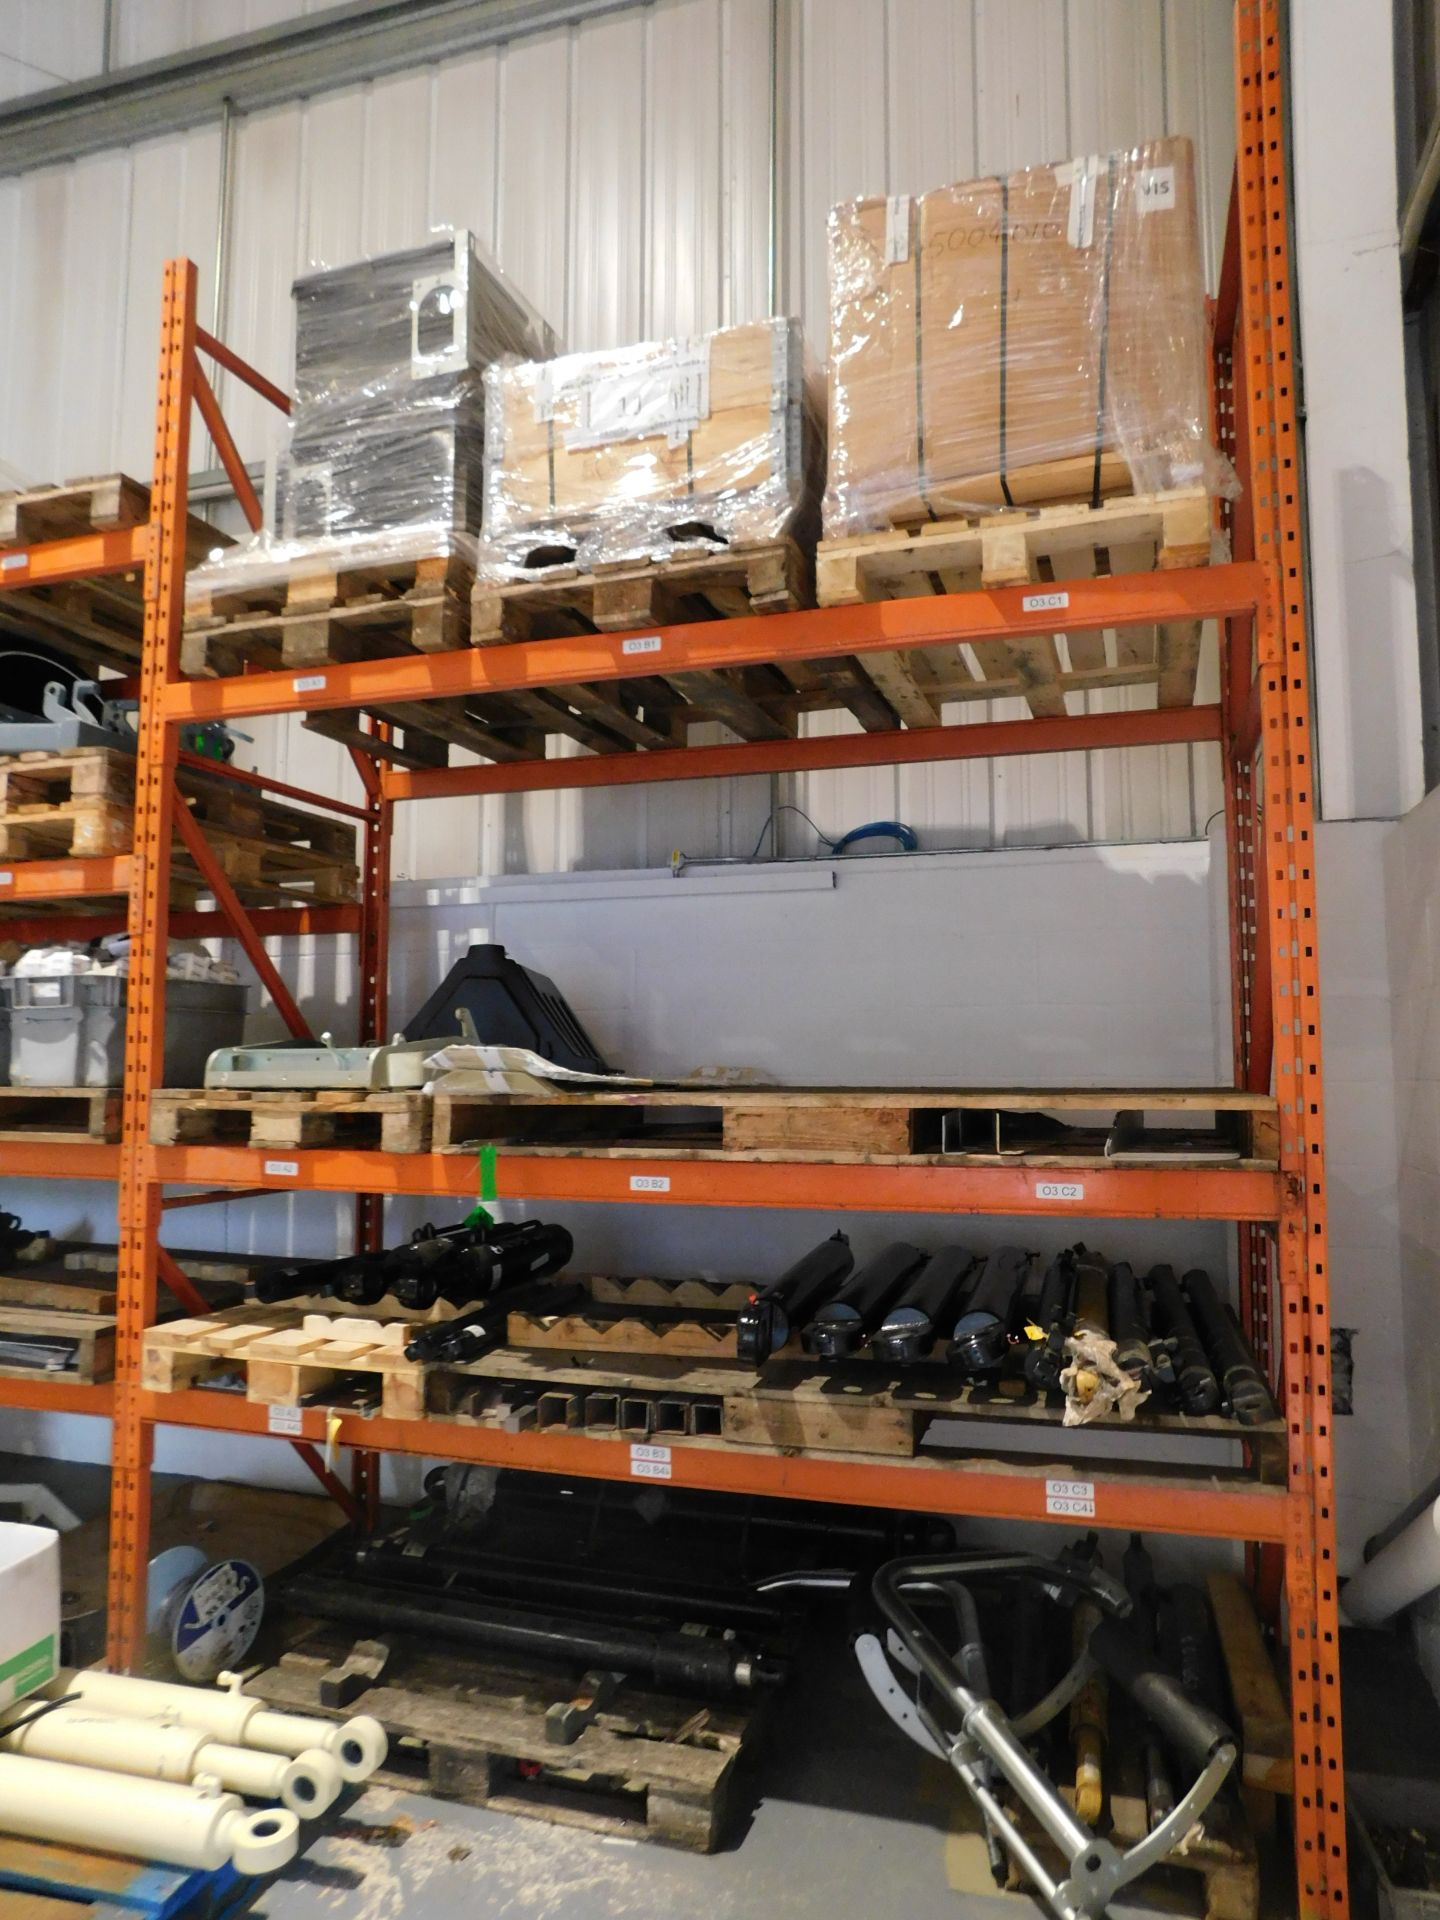 3 Bays of Boltless Pallet Racking (Excluding Contents) (Collection Delayed to Tuesday 18th June - Image 3 of 5